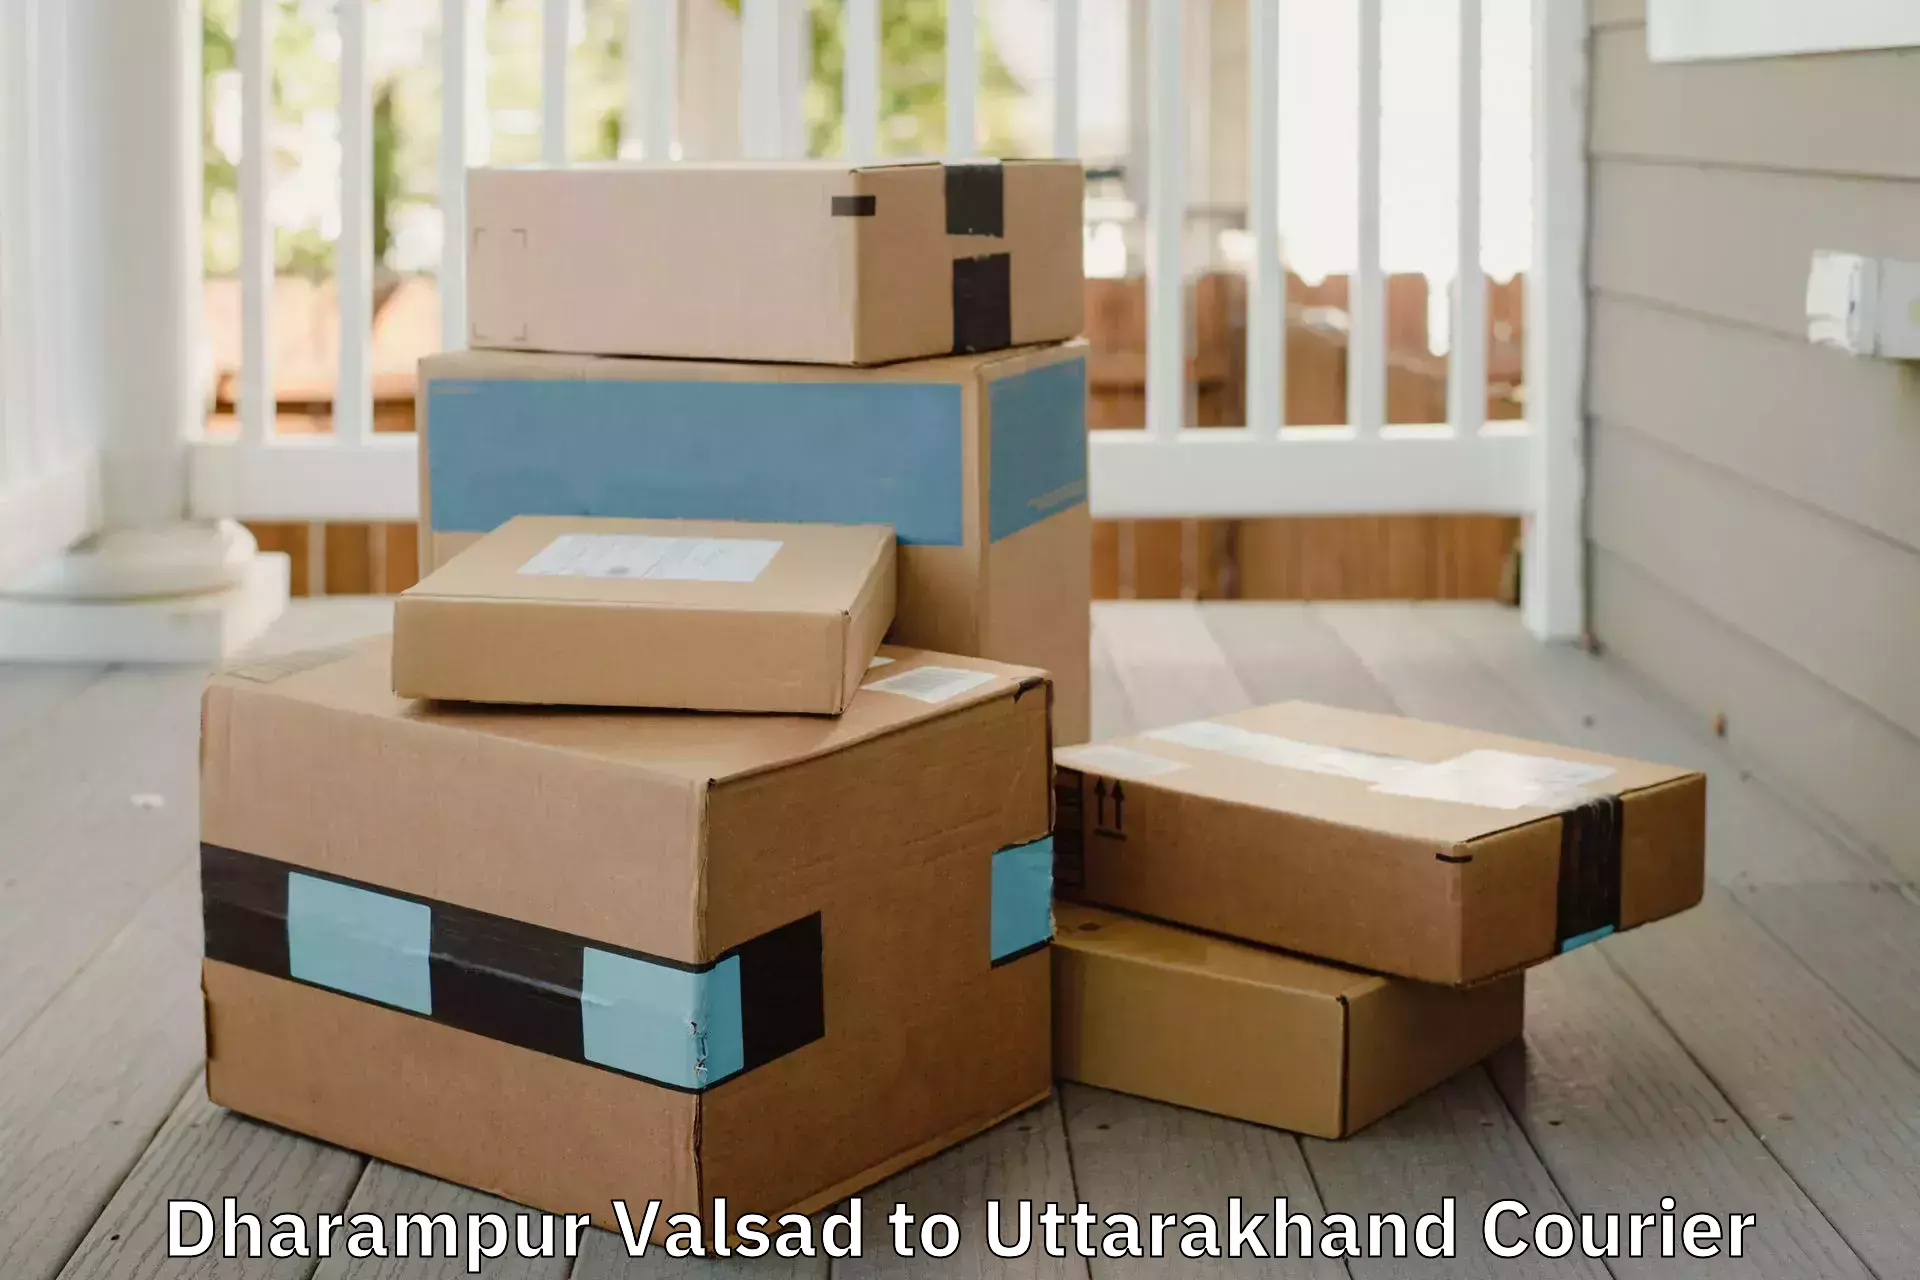 Moving and packing experts Dharampur Valsad to Someshwar